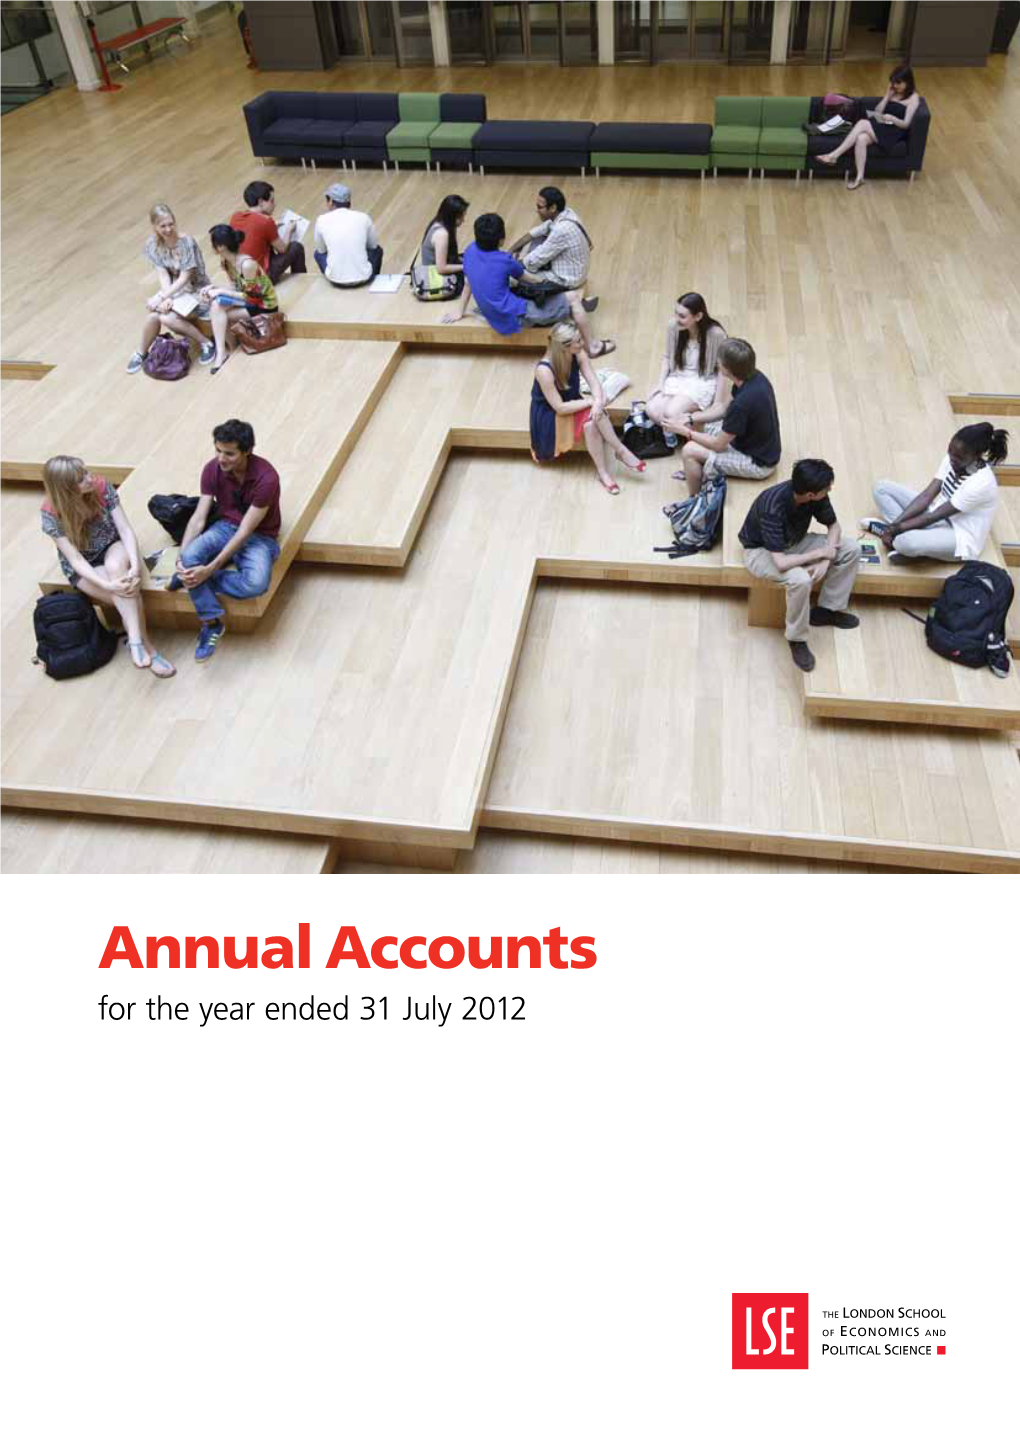 Annual Accounts for the Year Ended 31 July 2012 Contents